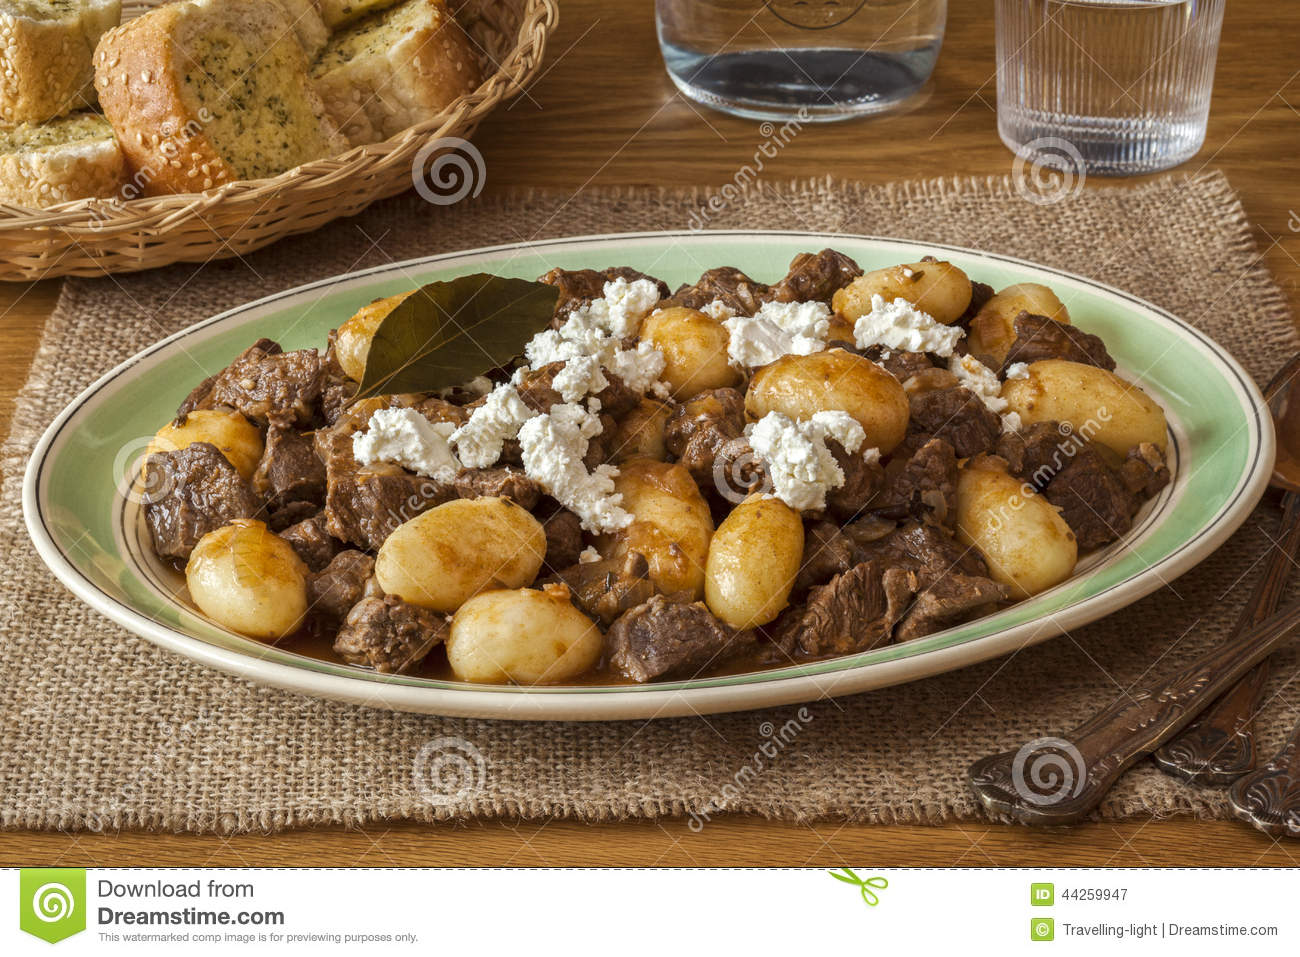 Greek Lamb Stew Or Stifado Topped With Crumbled Feta Cheese Served